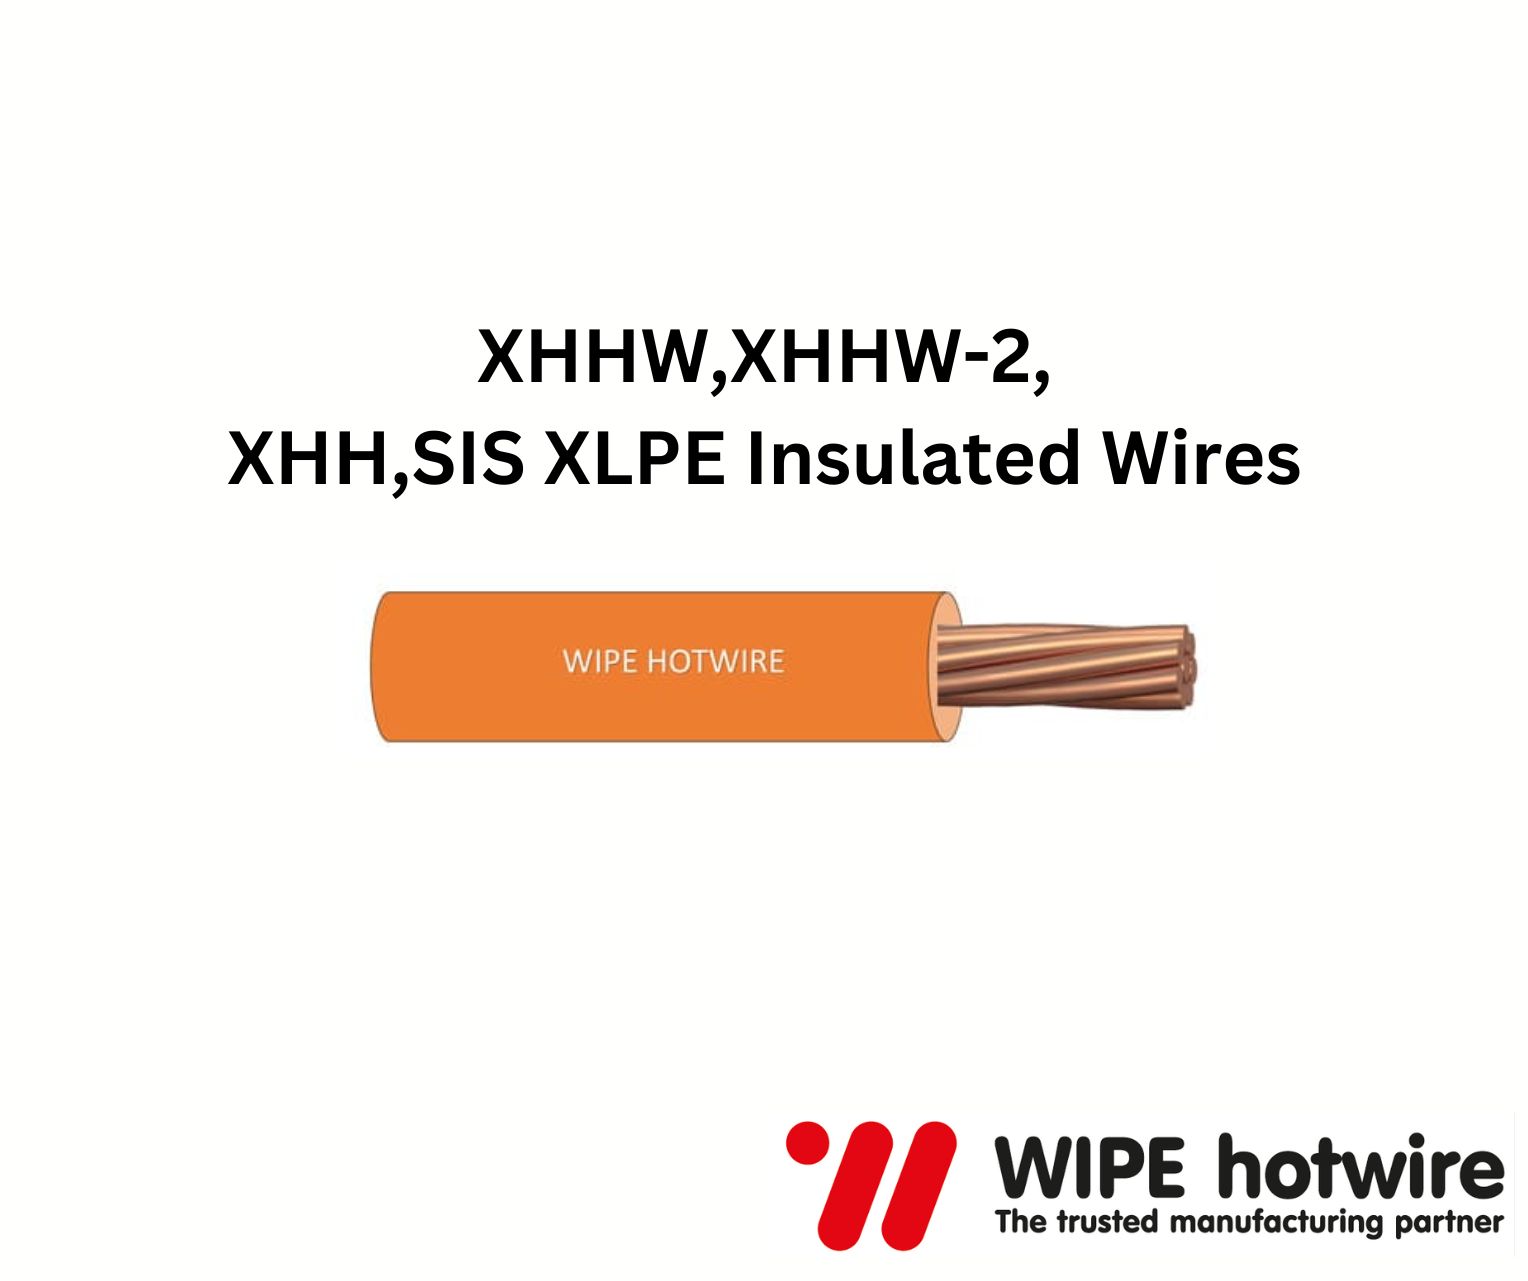 XHHW Insulated Wires